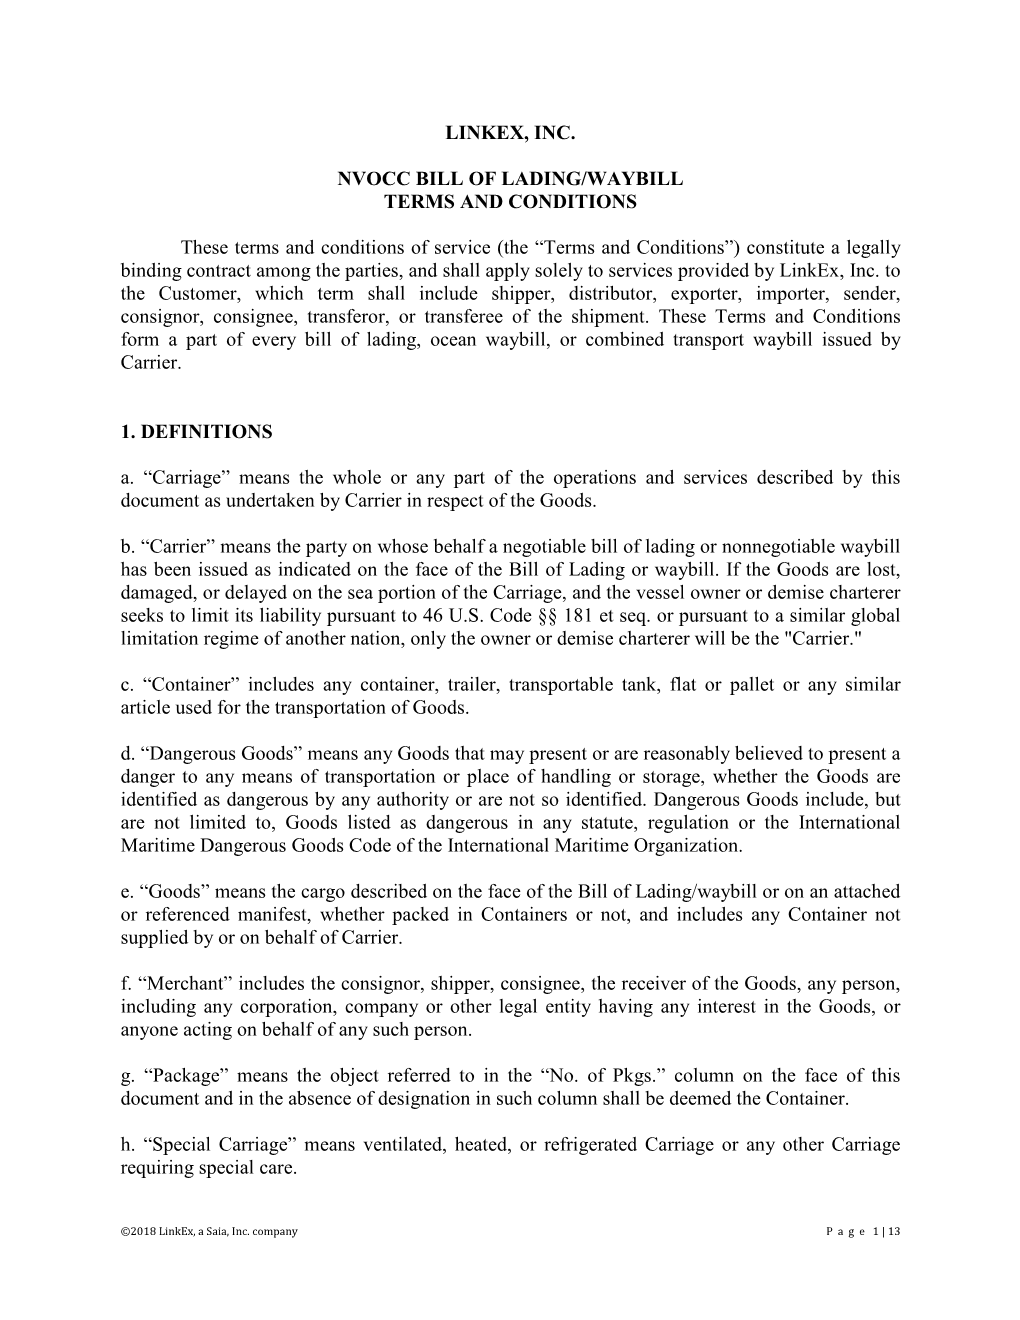 NVOCC Bill of Lading / Waybill Terms & Conditions